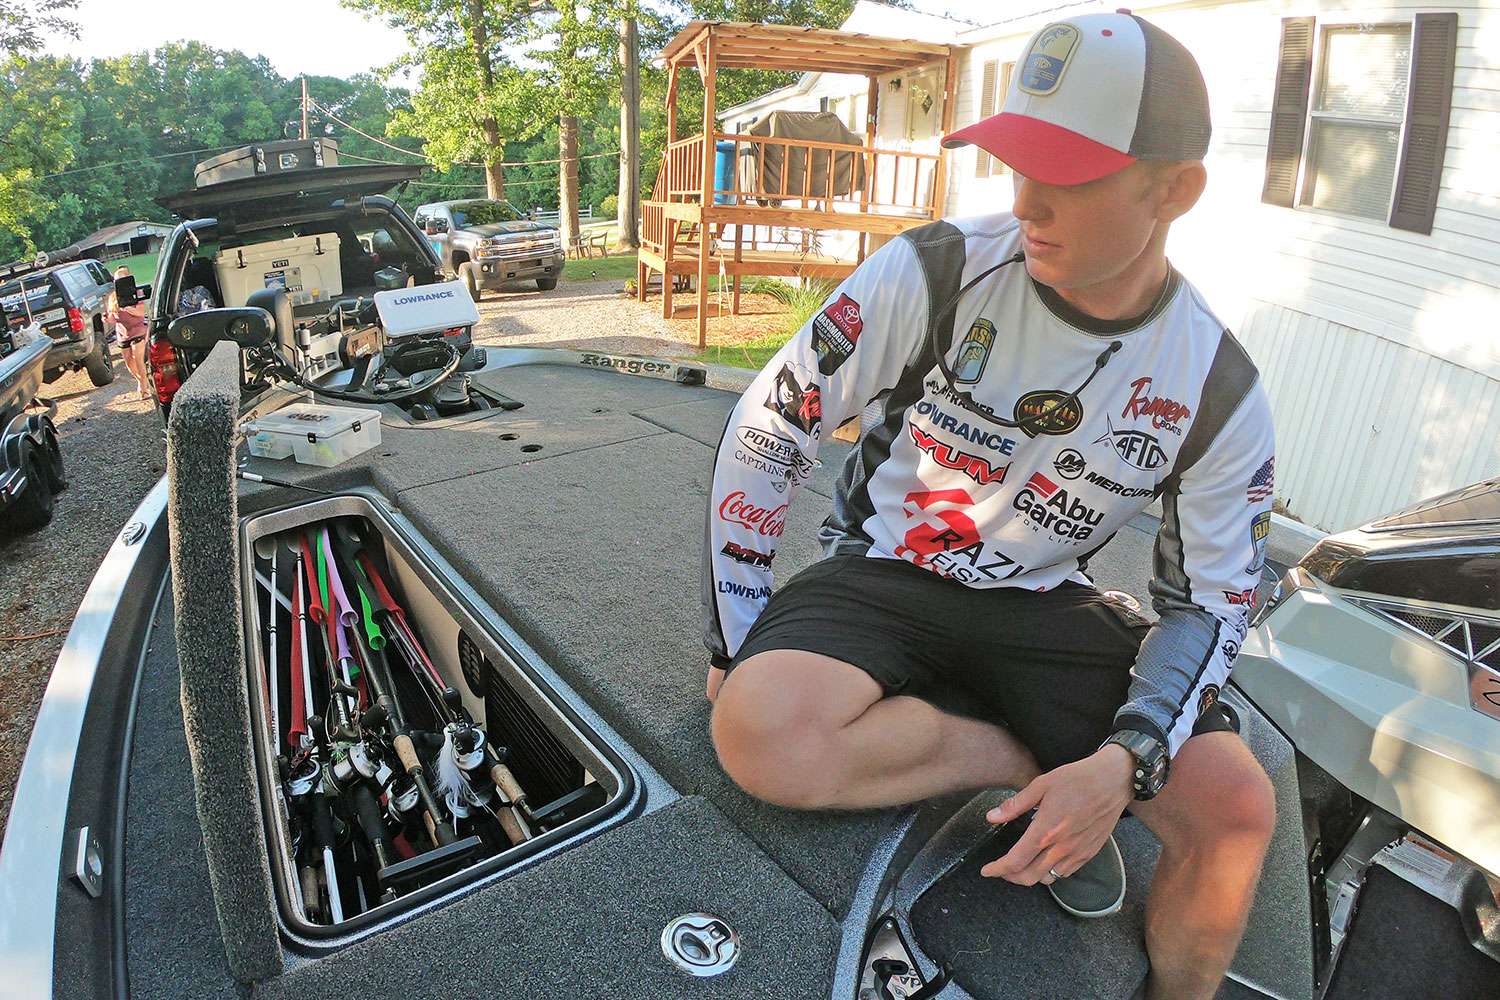 Moving to the port-side rod locker, Frazier grabs a couple of his favorite rod-and-reel combos.